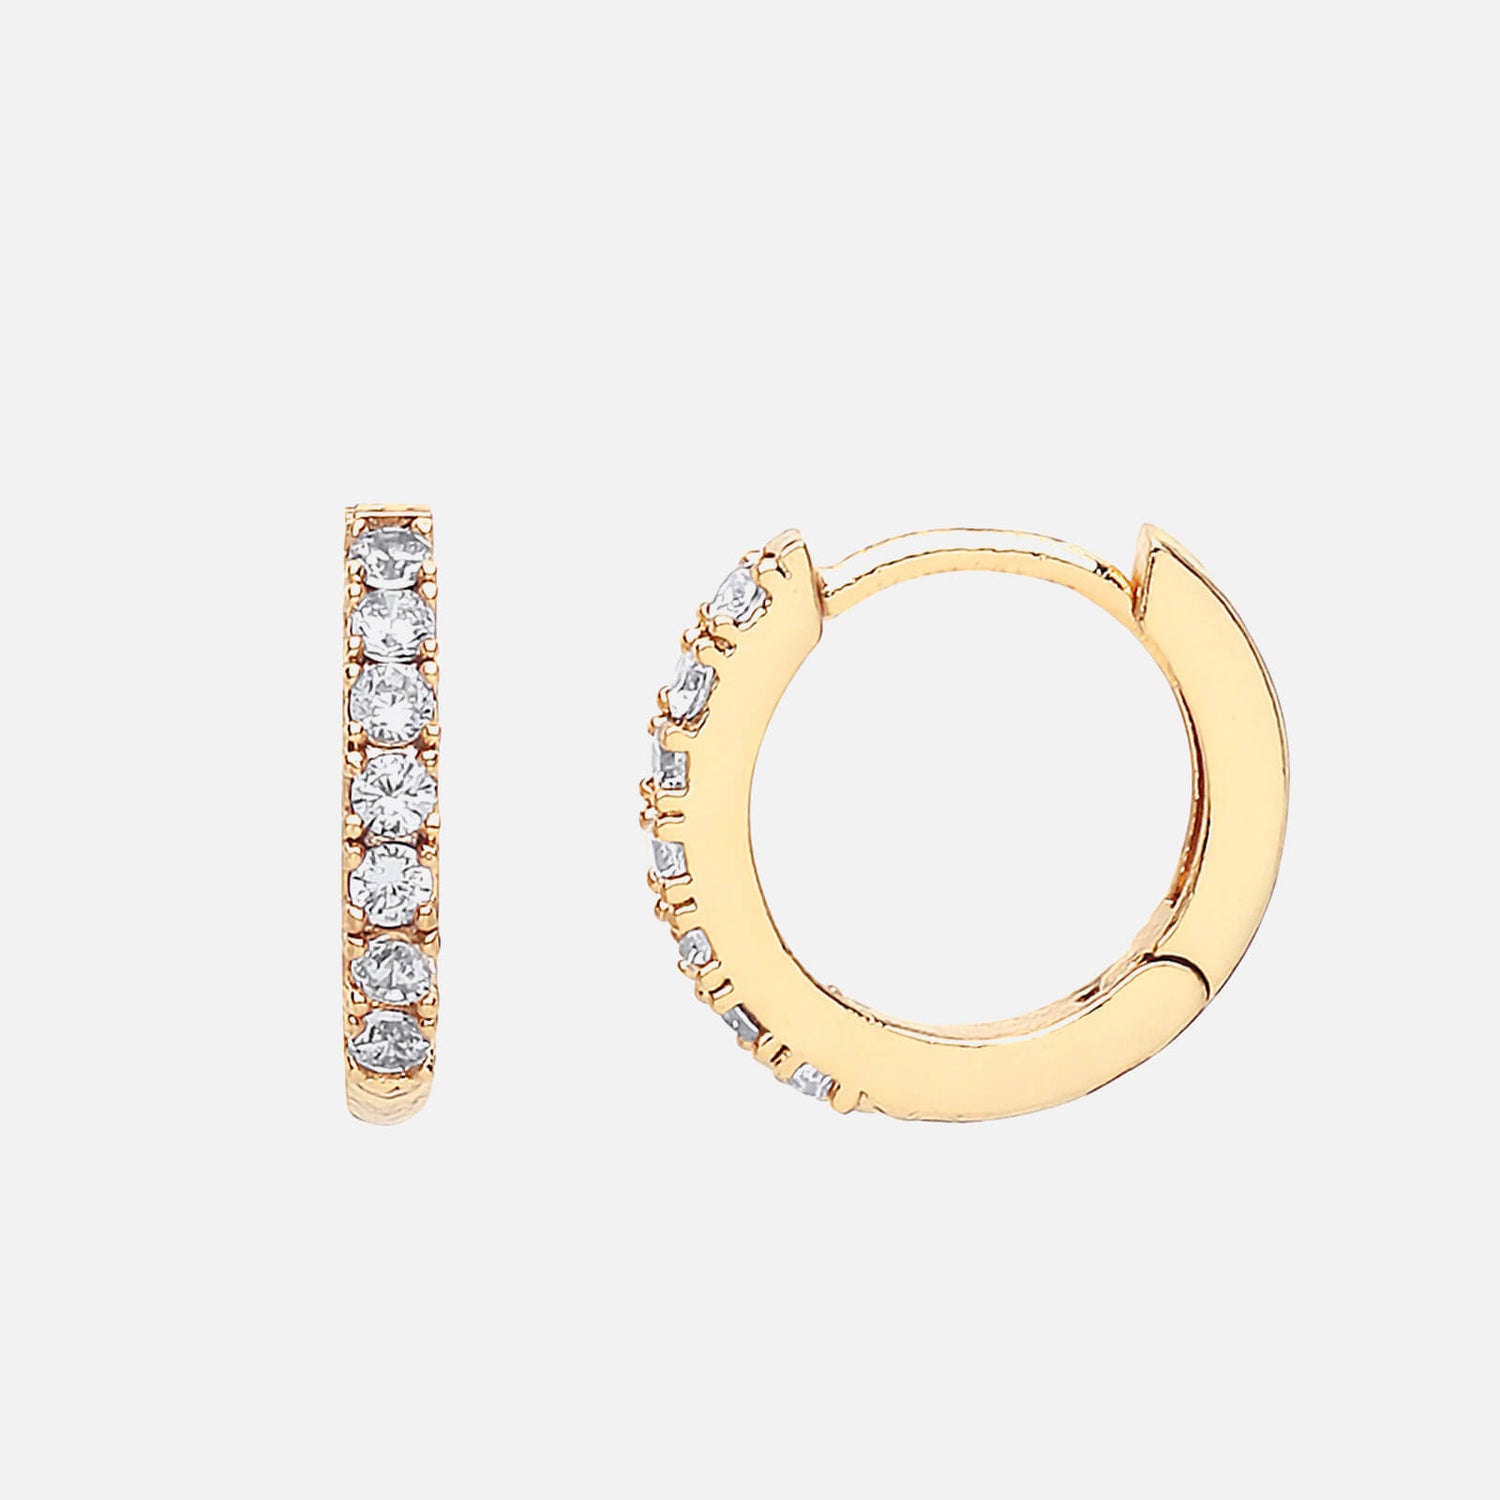 Estella Bartlett Women's Pave Set Hoop Earrings with White CZ- Gold Plated/NP